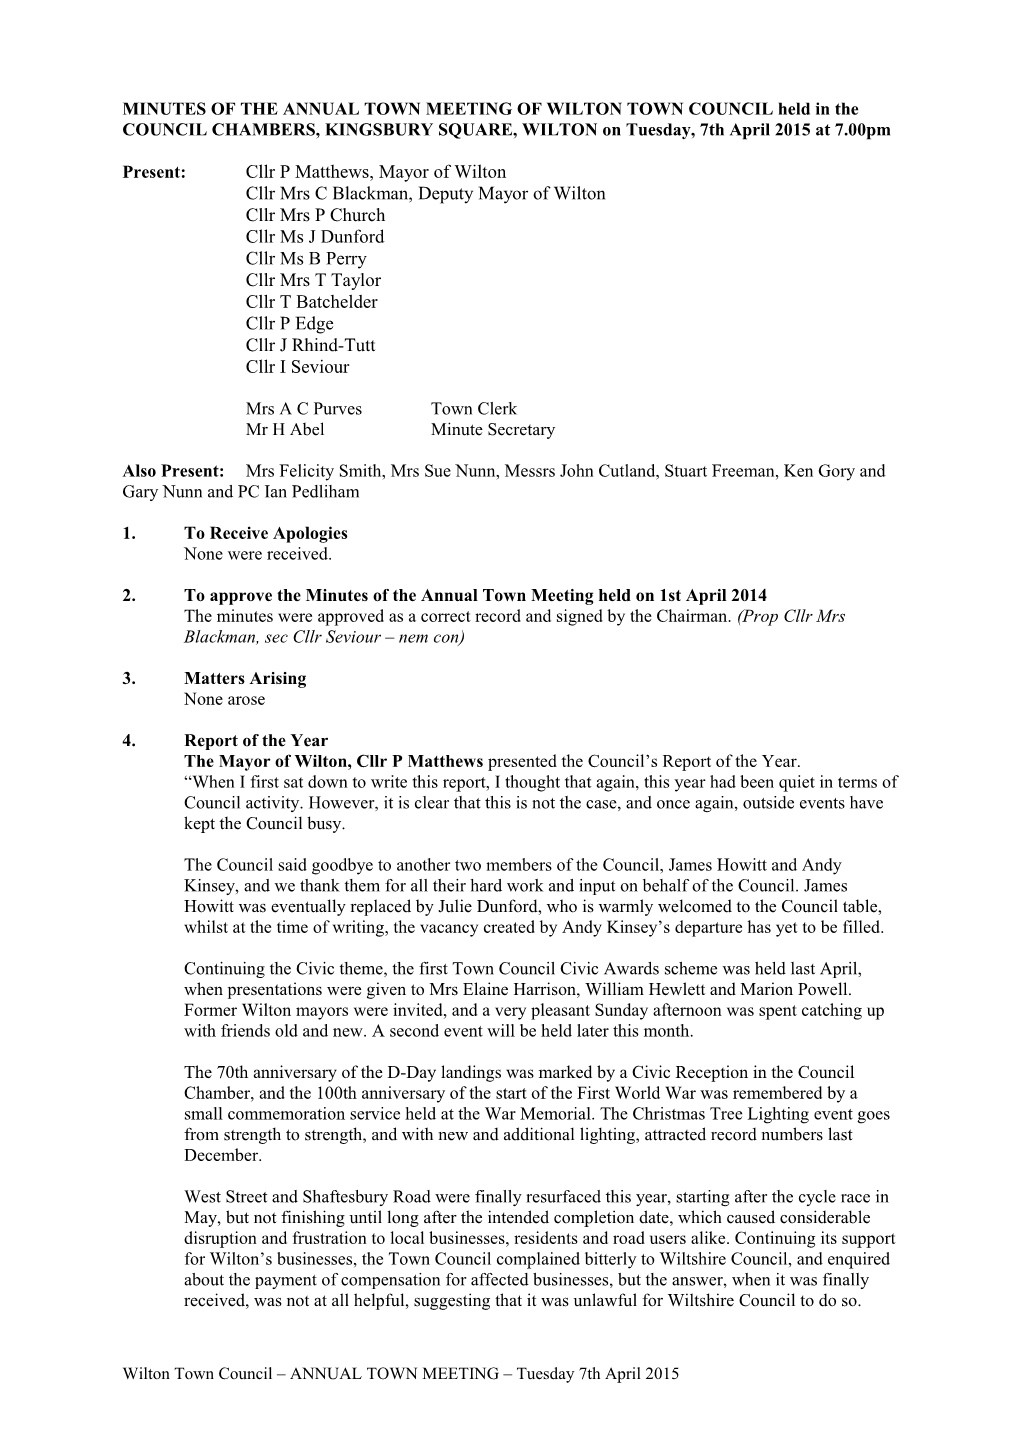 MINUTES of a Meeting of WILTON TOWN COUNCIL Held in the COUNCIL CHAMBERS, KINGSBURY SQUARE s3